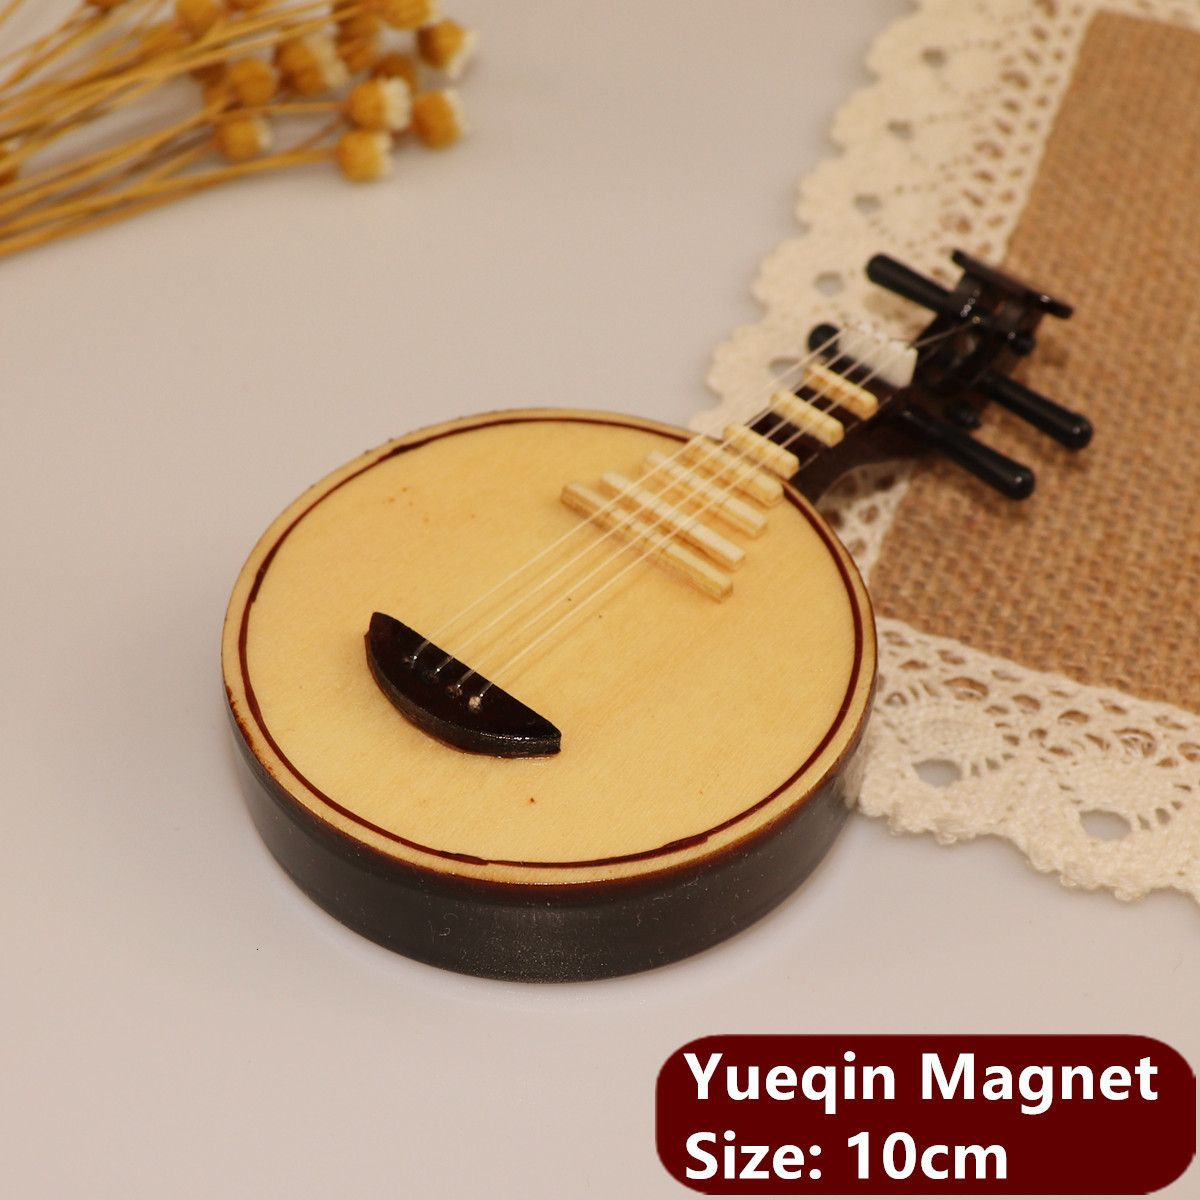 Yueqin Magnet